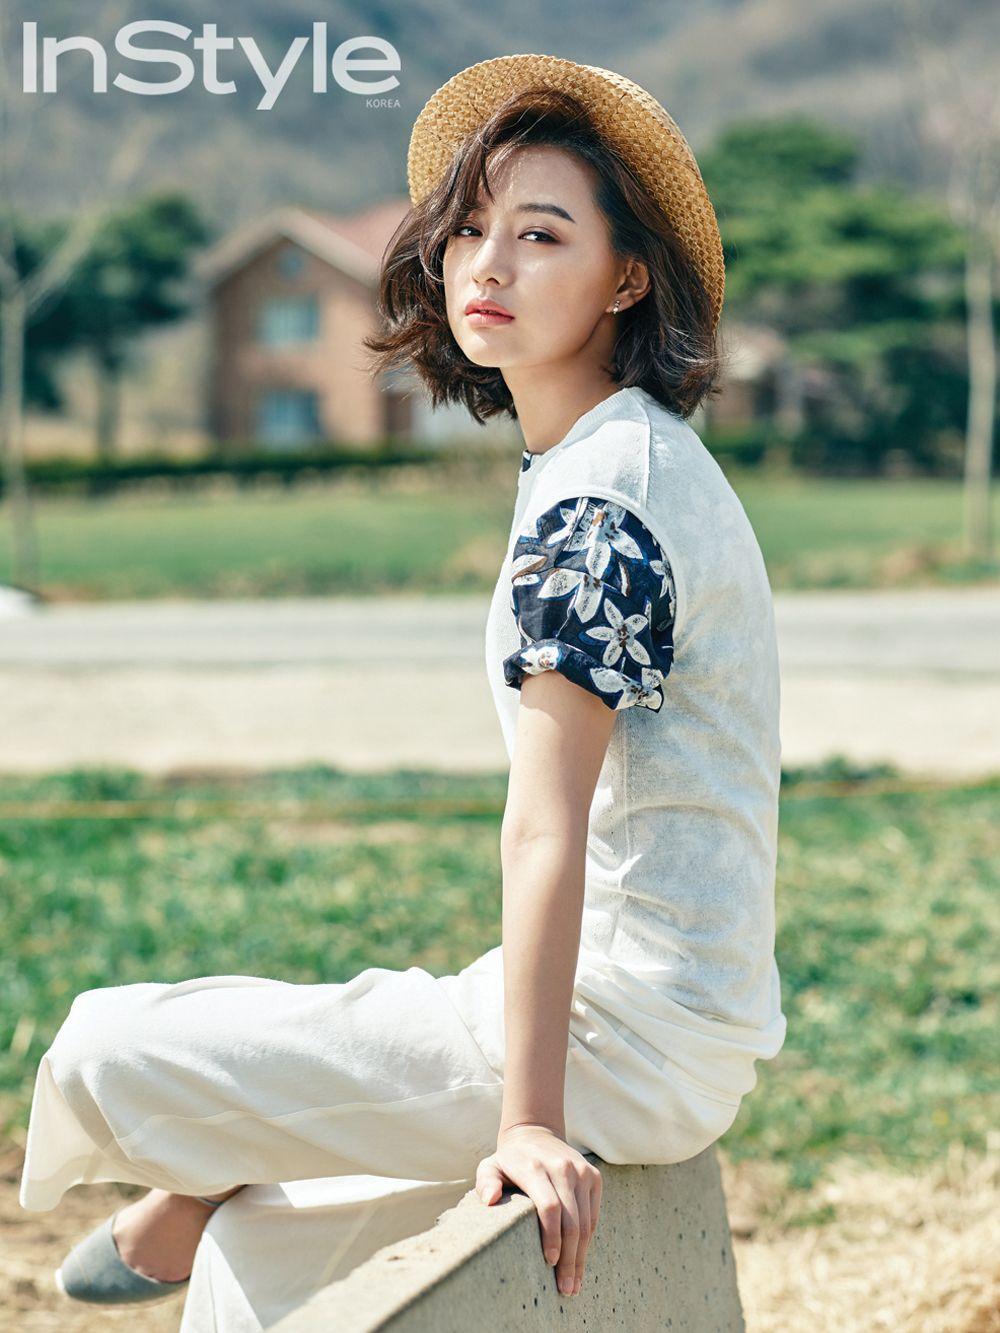 InStyle Korea Feat. Kim Ji Won Embracing the Fresh Air. Couch